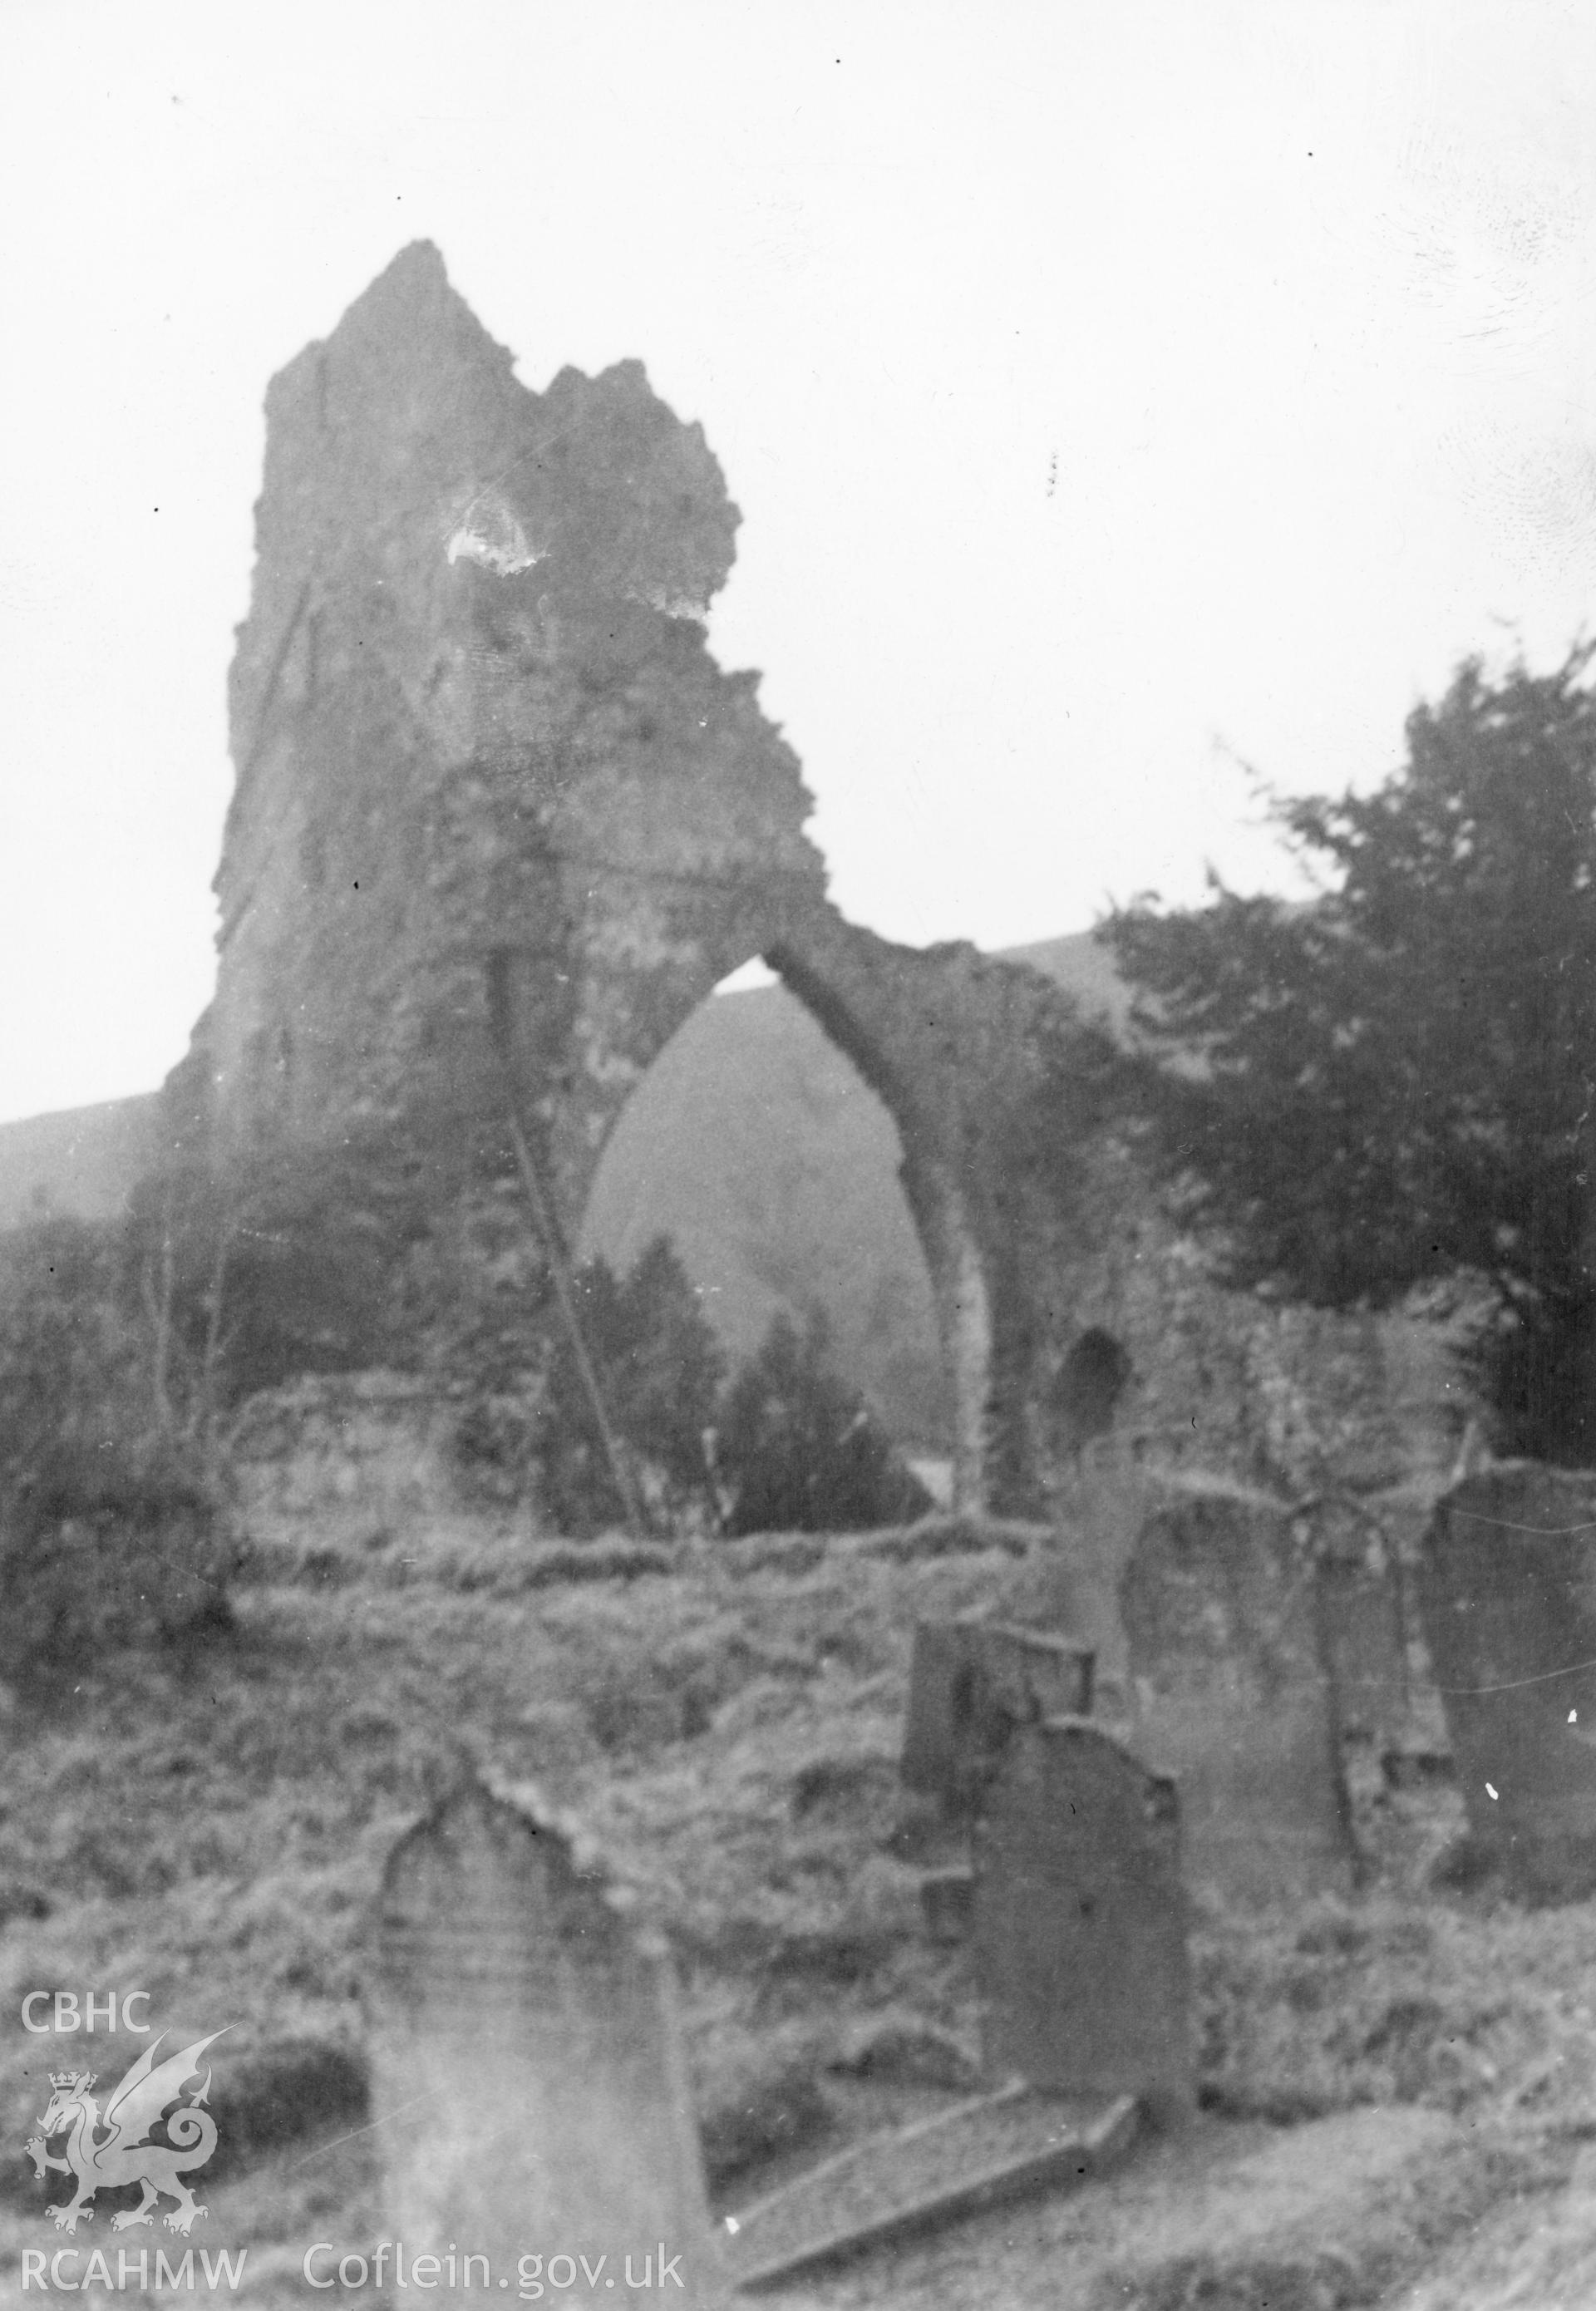 Detail of high arch with long ladder at the side, presumably in preparation for repair and restoration at Talley Abbey.